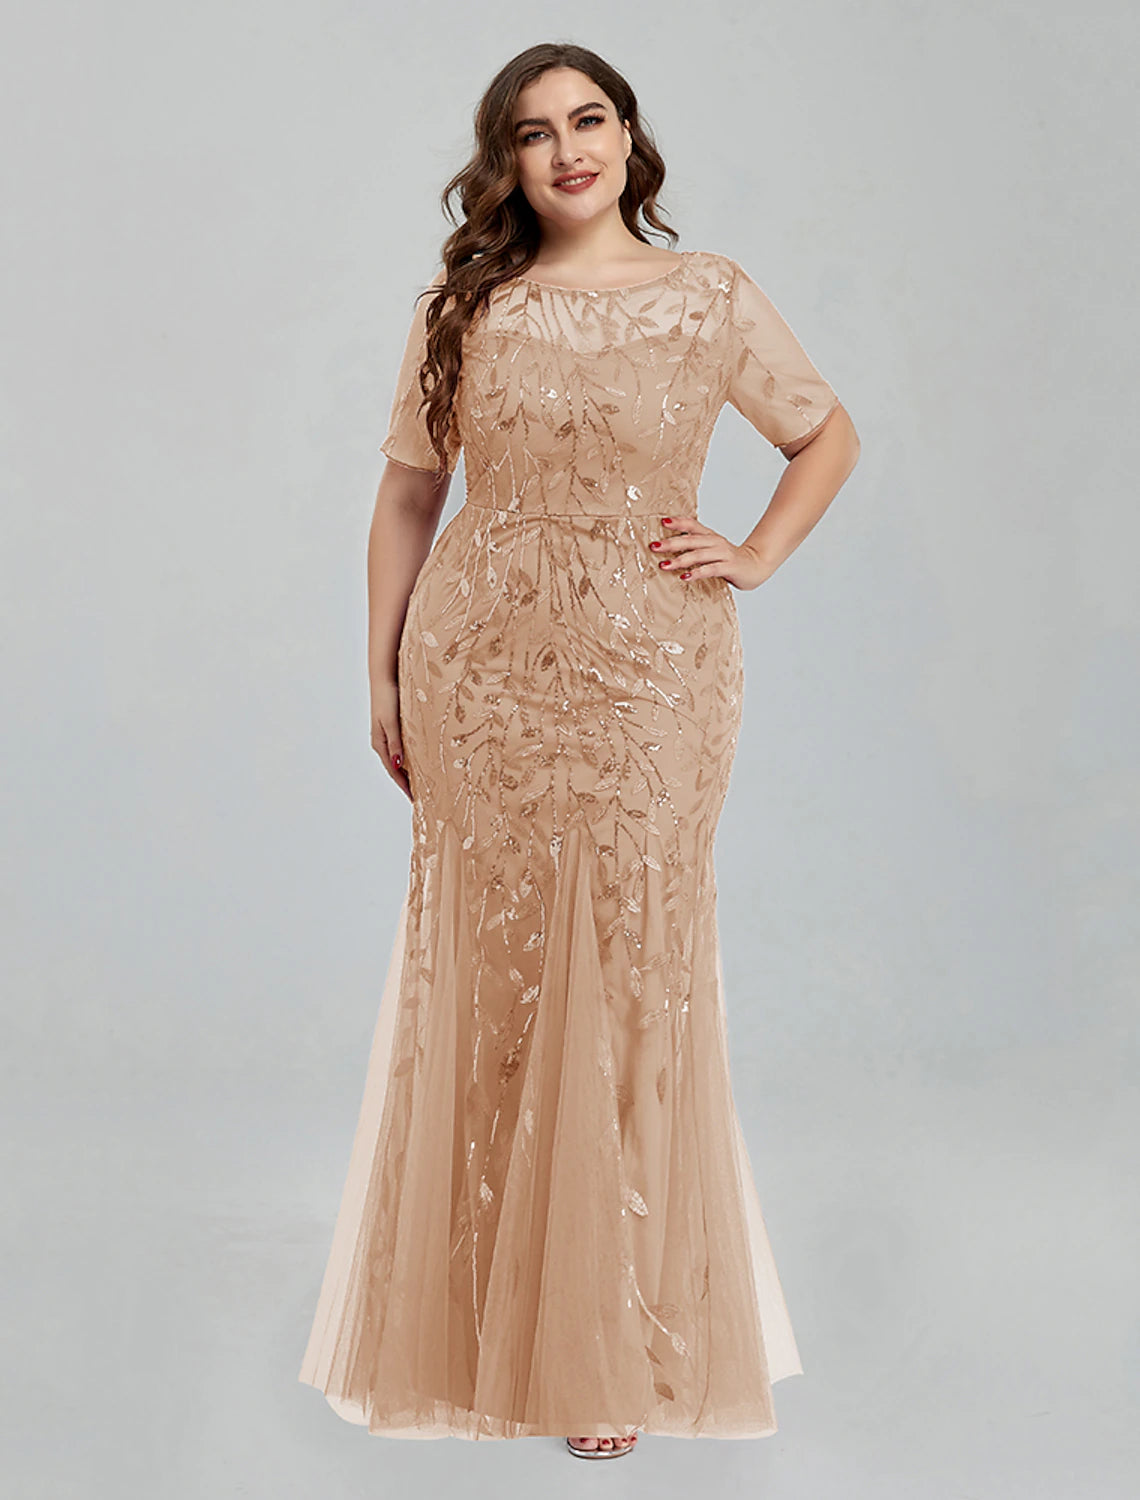 Mermaid / Trumpet Evening Gown Empire Dress Wedding Guest Formal Evening Floor Length Short Sleeve Jewel Neck Bridesmaid Dress Tulle with Embroidery